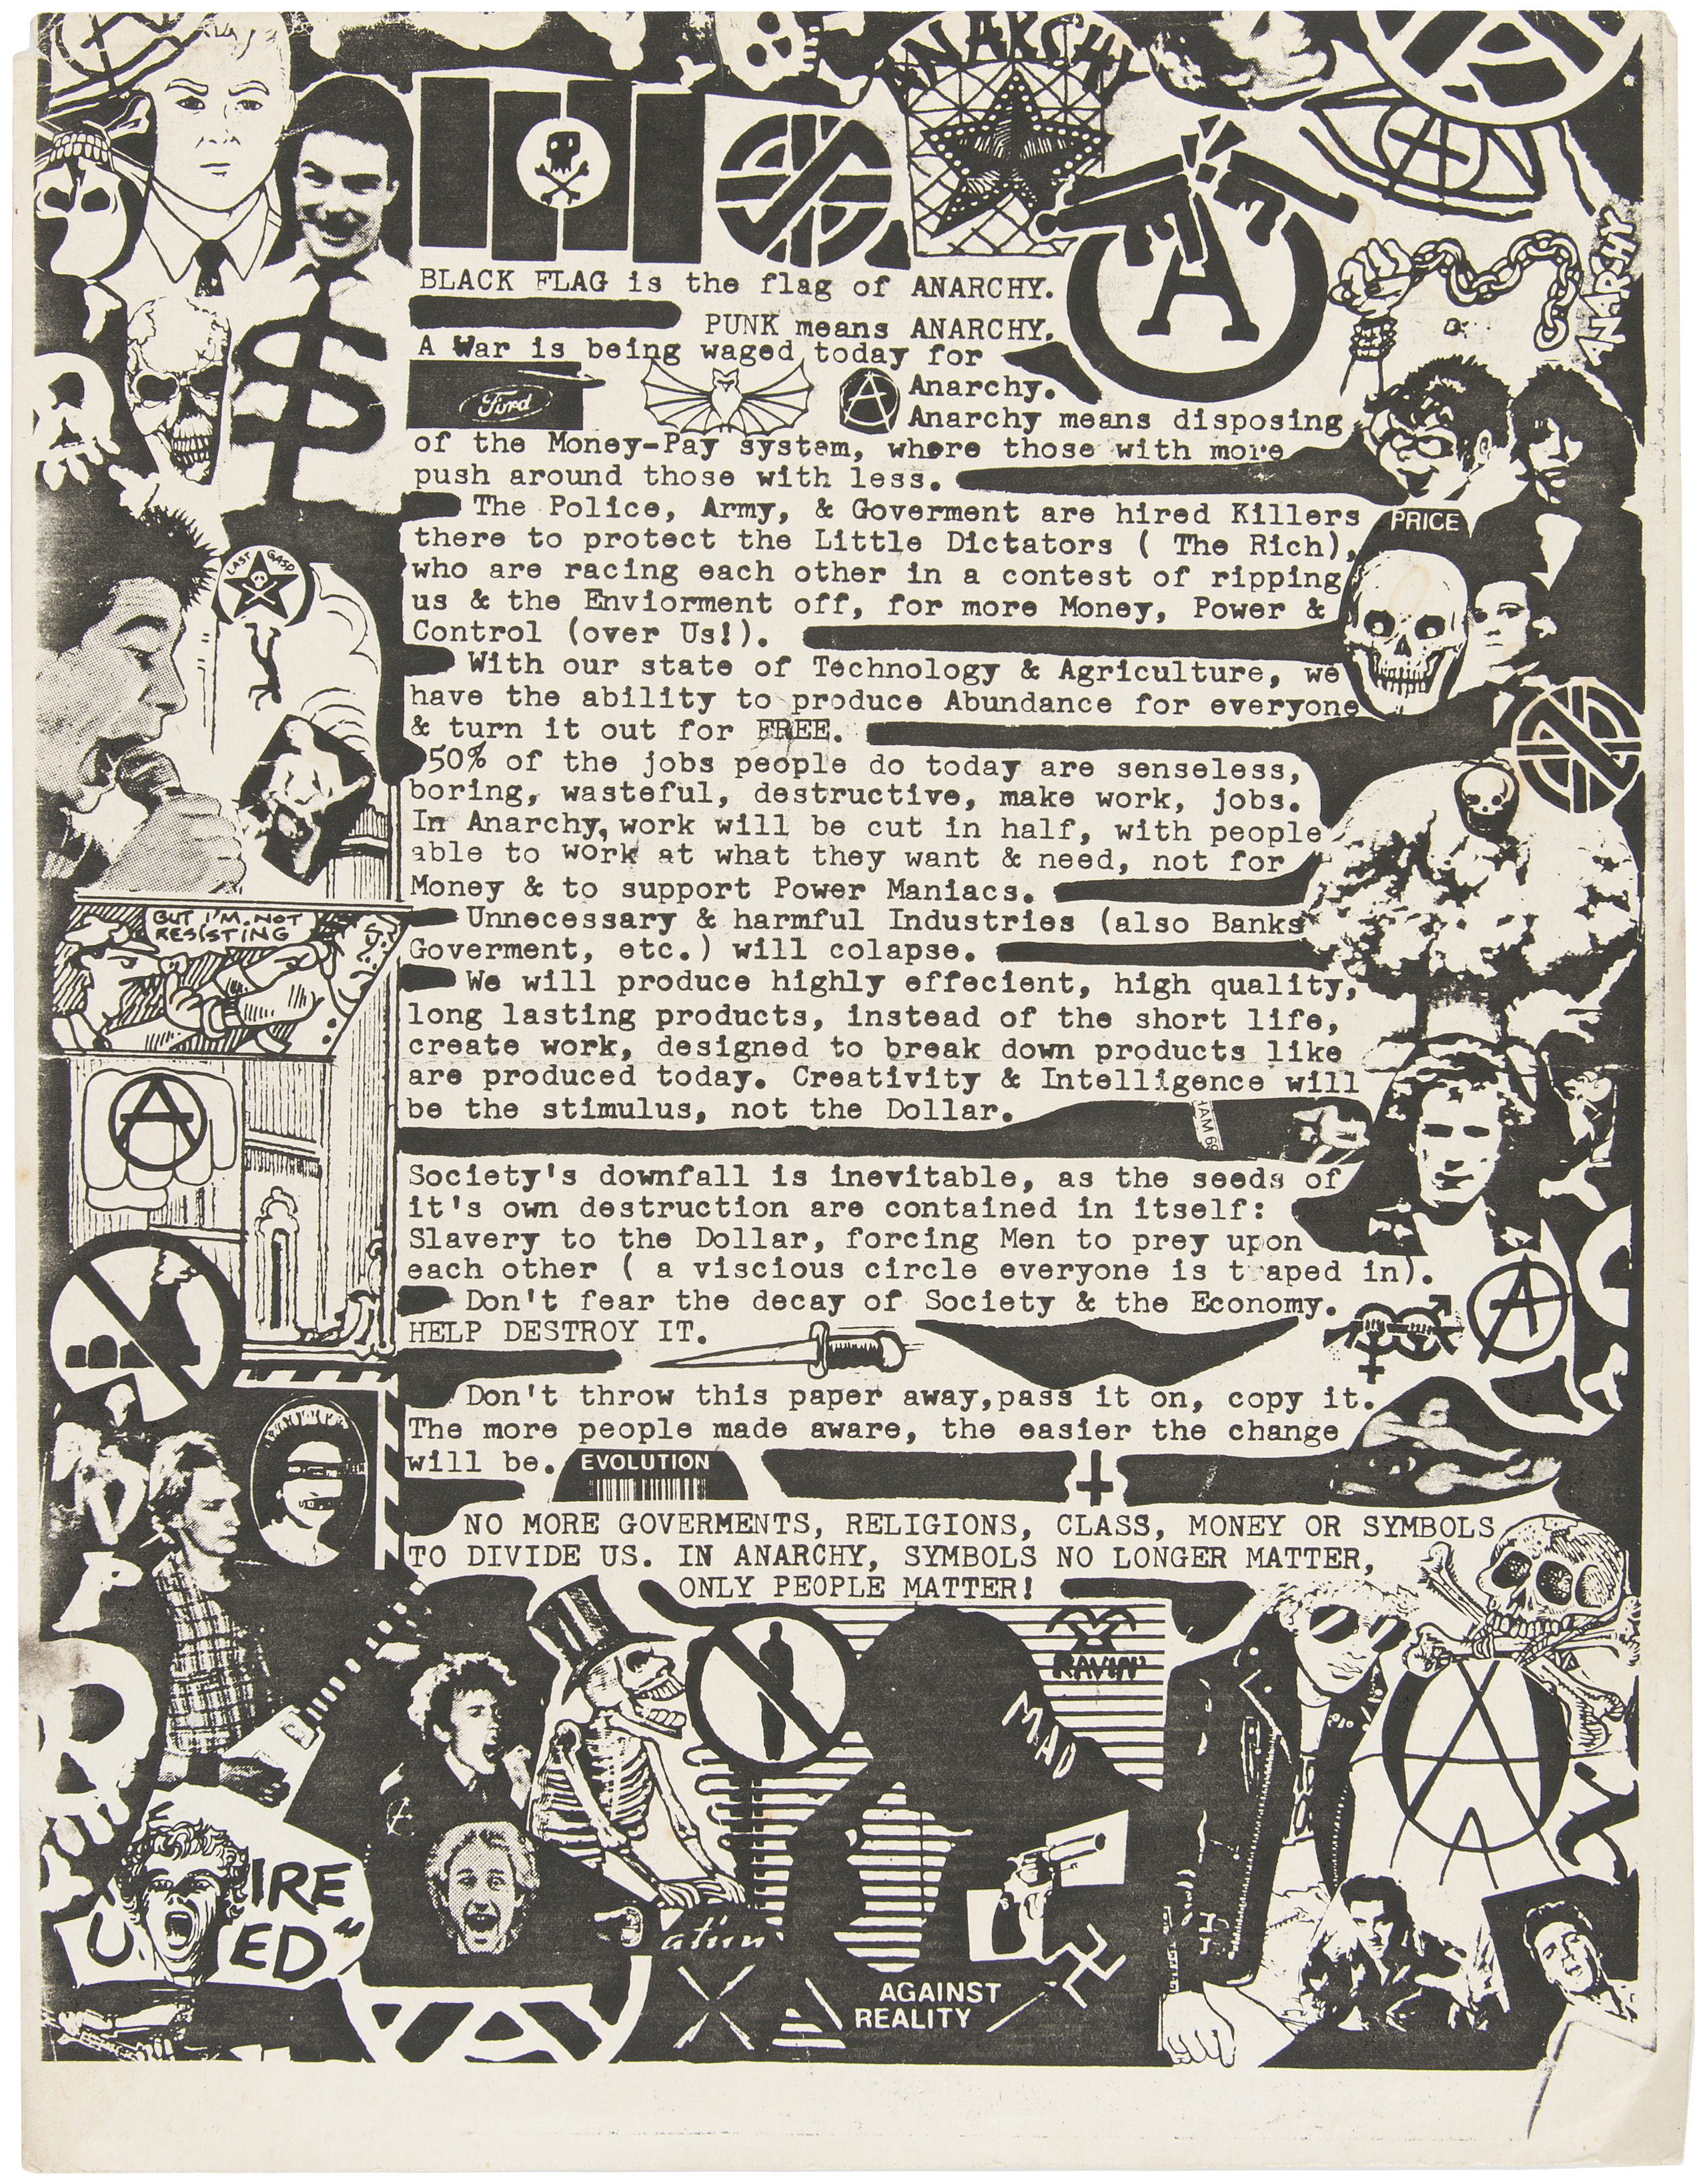 Hake's - PUNK ROCK CONCERT FLYERS FEATURING BLACK FLAG.